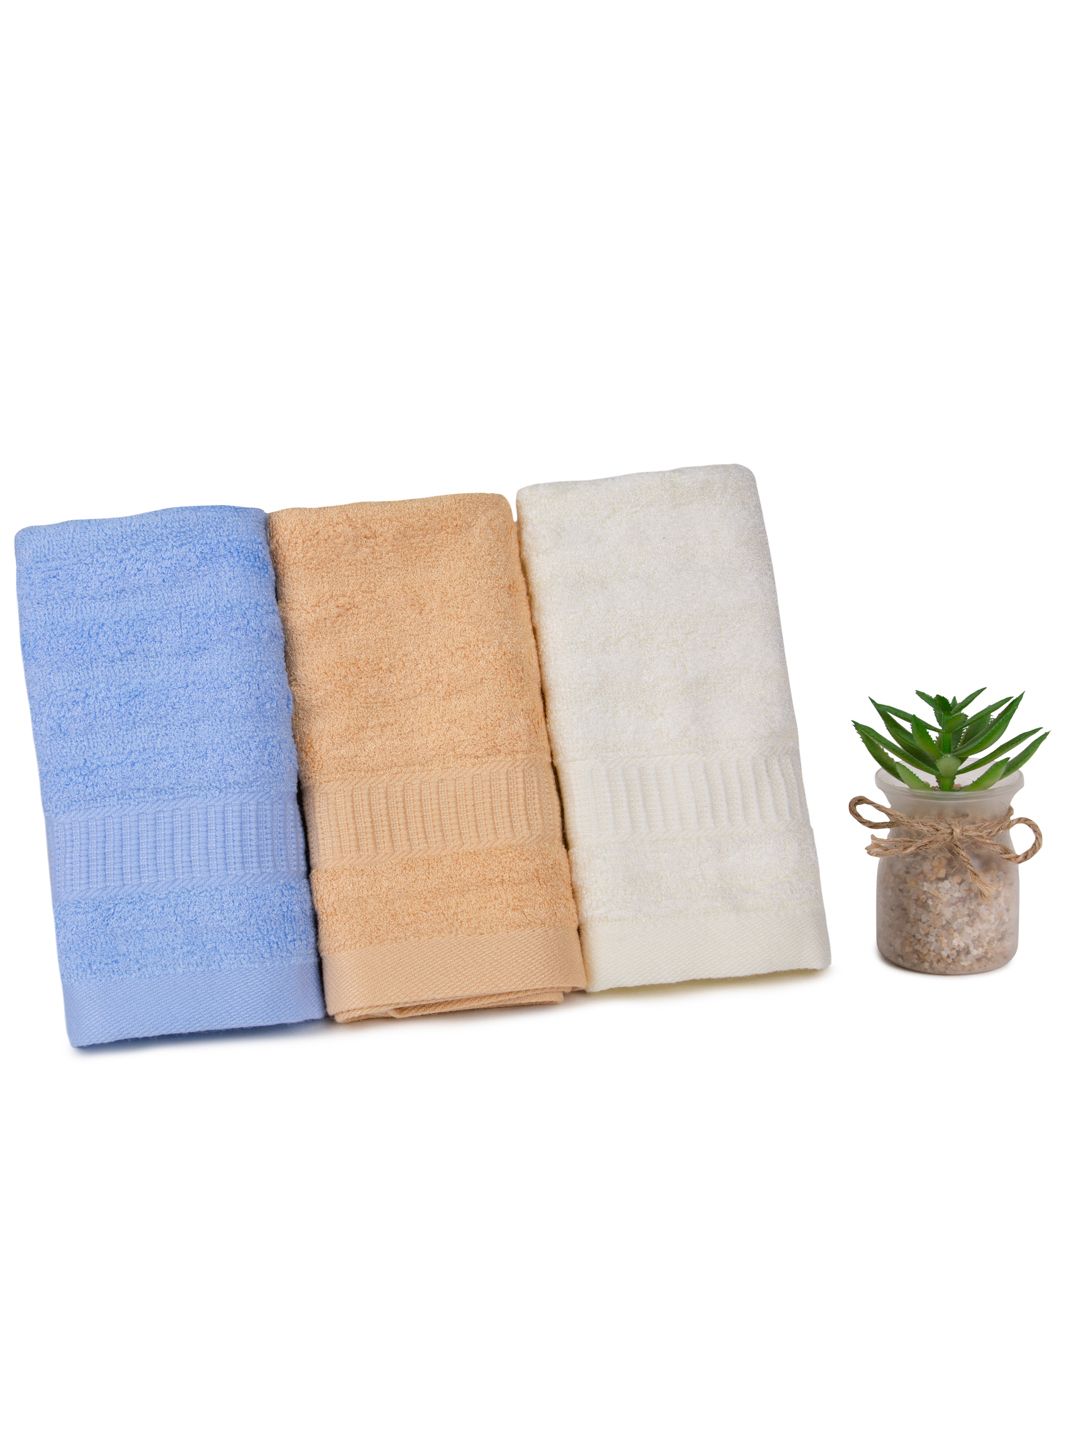 MUSH Set of 3 Bamboo 600 GSM Ultra Soft & Eco Friendly Face Towels Price in India